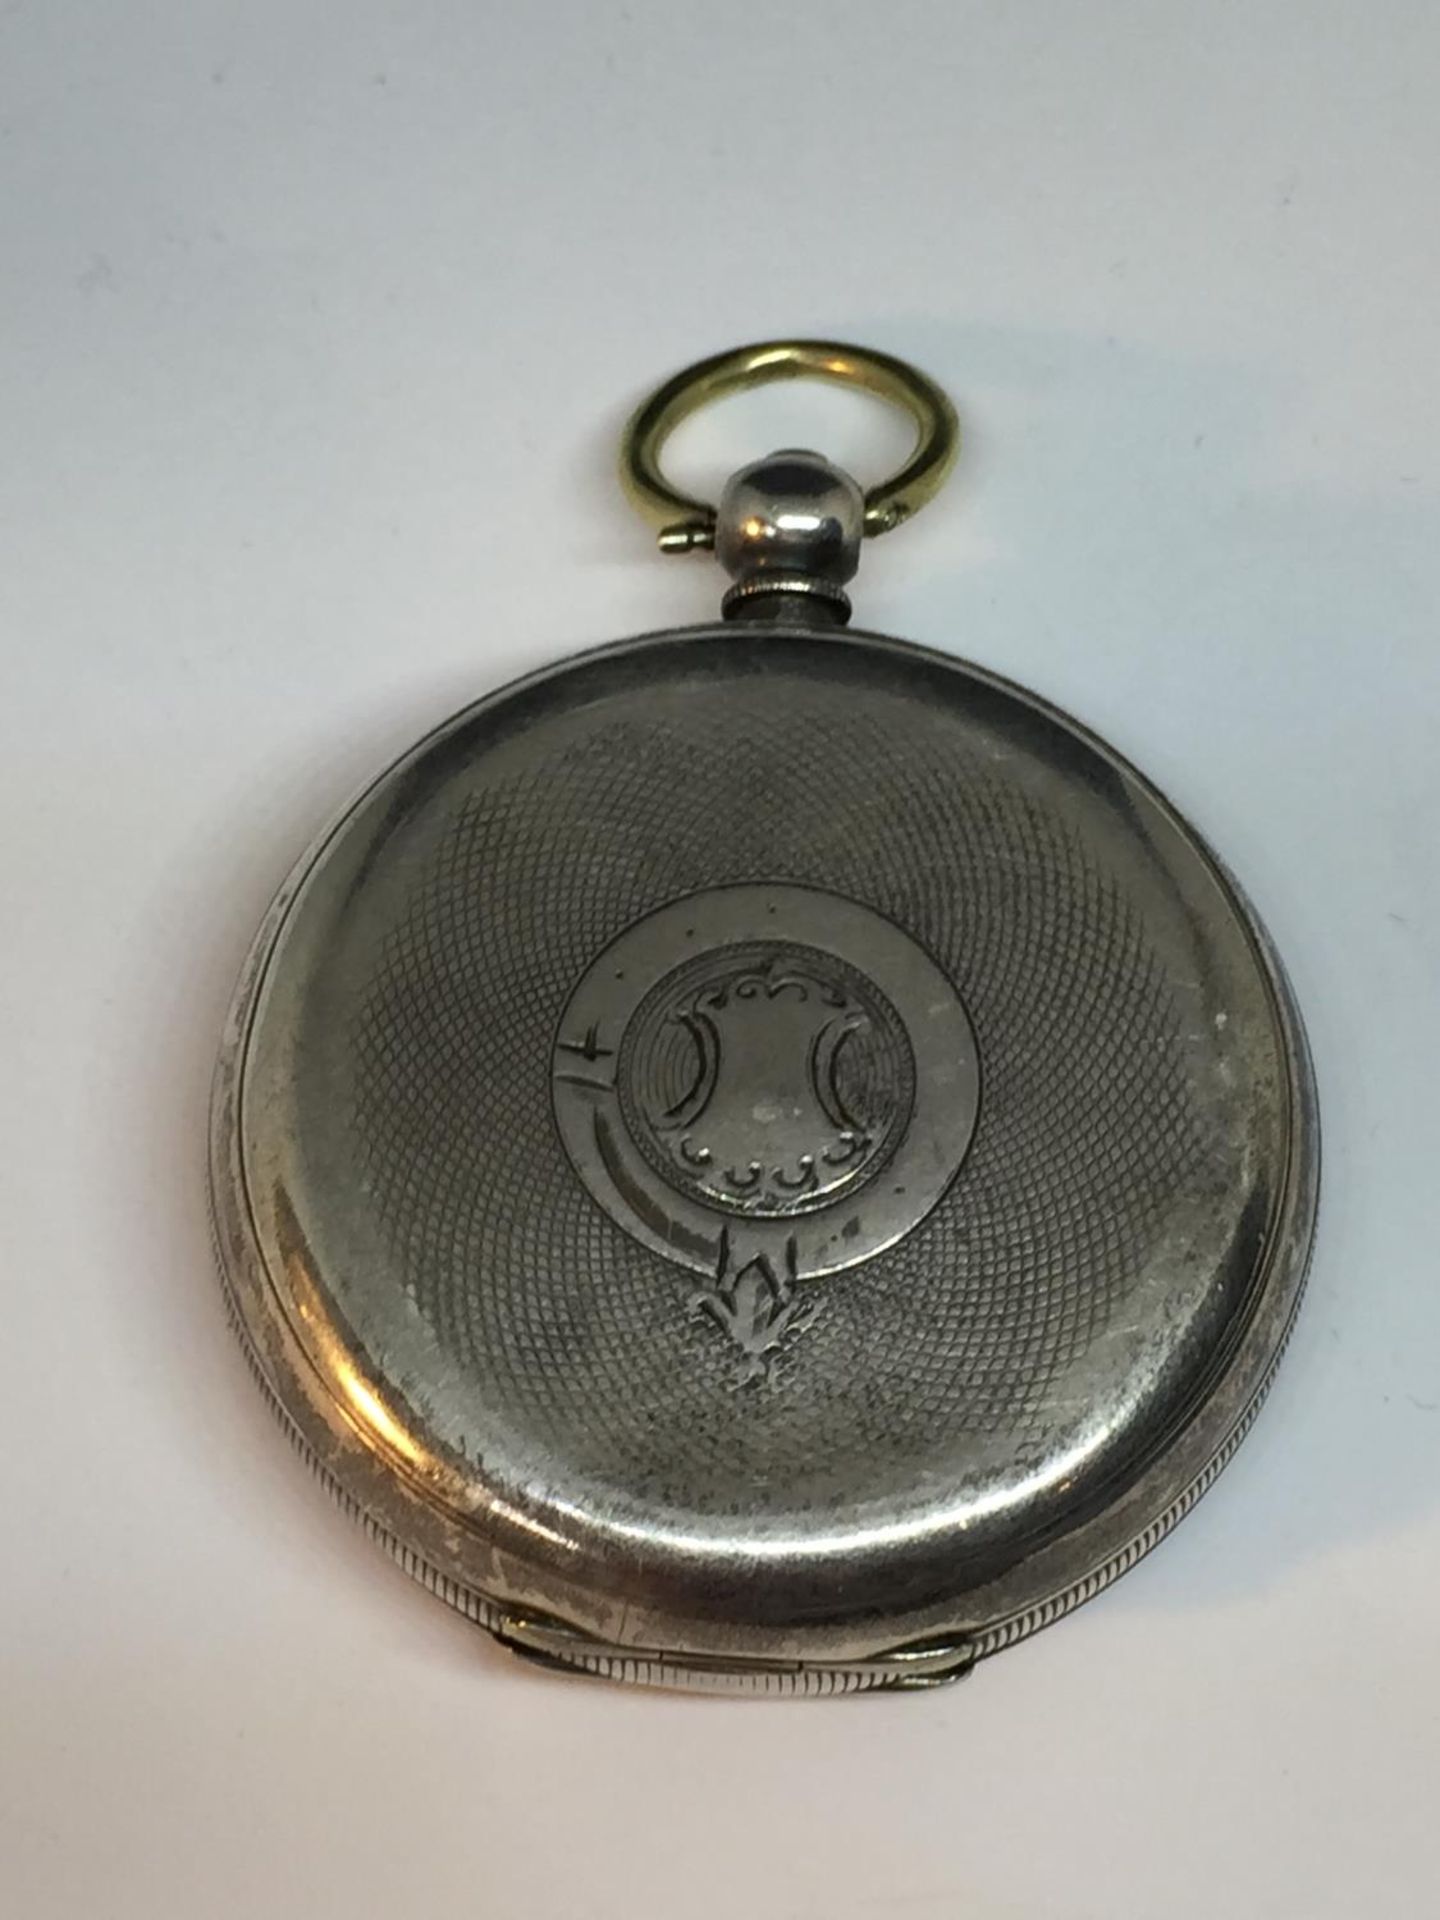 A MARKED 935 SILVER POCKET WATCH SEEN WORKING BUT NO WARRANTY GIVEN - Image 2 of 4